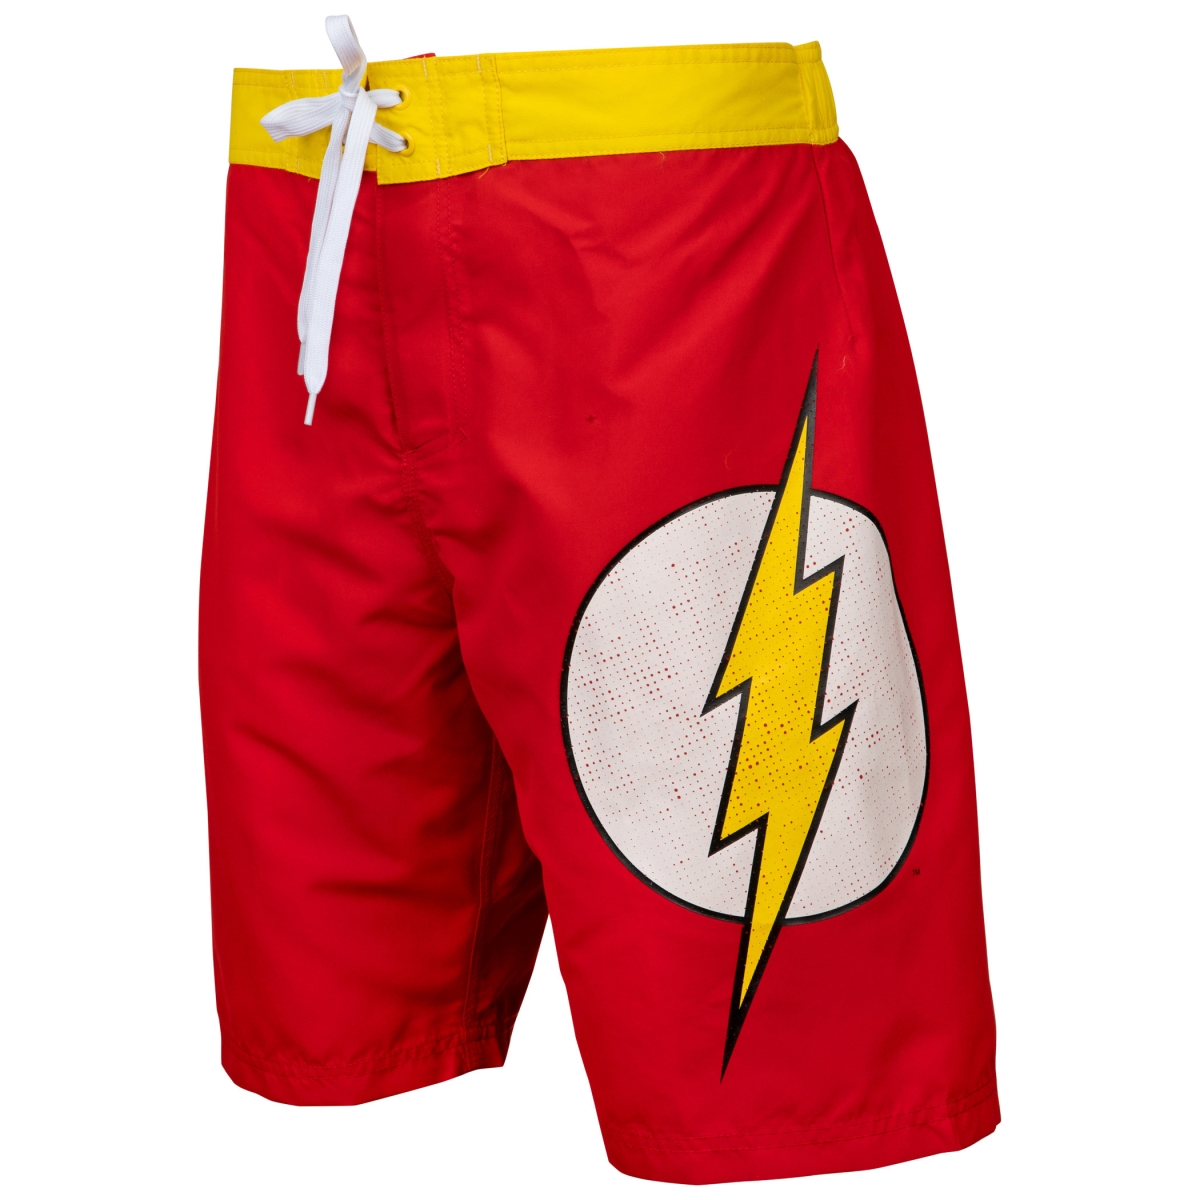 Picture of Flash 803503-3xlarge 48-50 Flash Symbol Board Shorts, Heather Red - 3XL 48-50